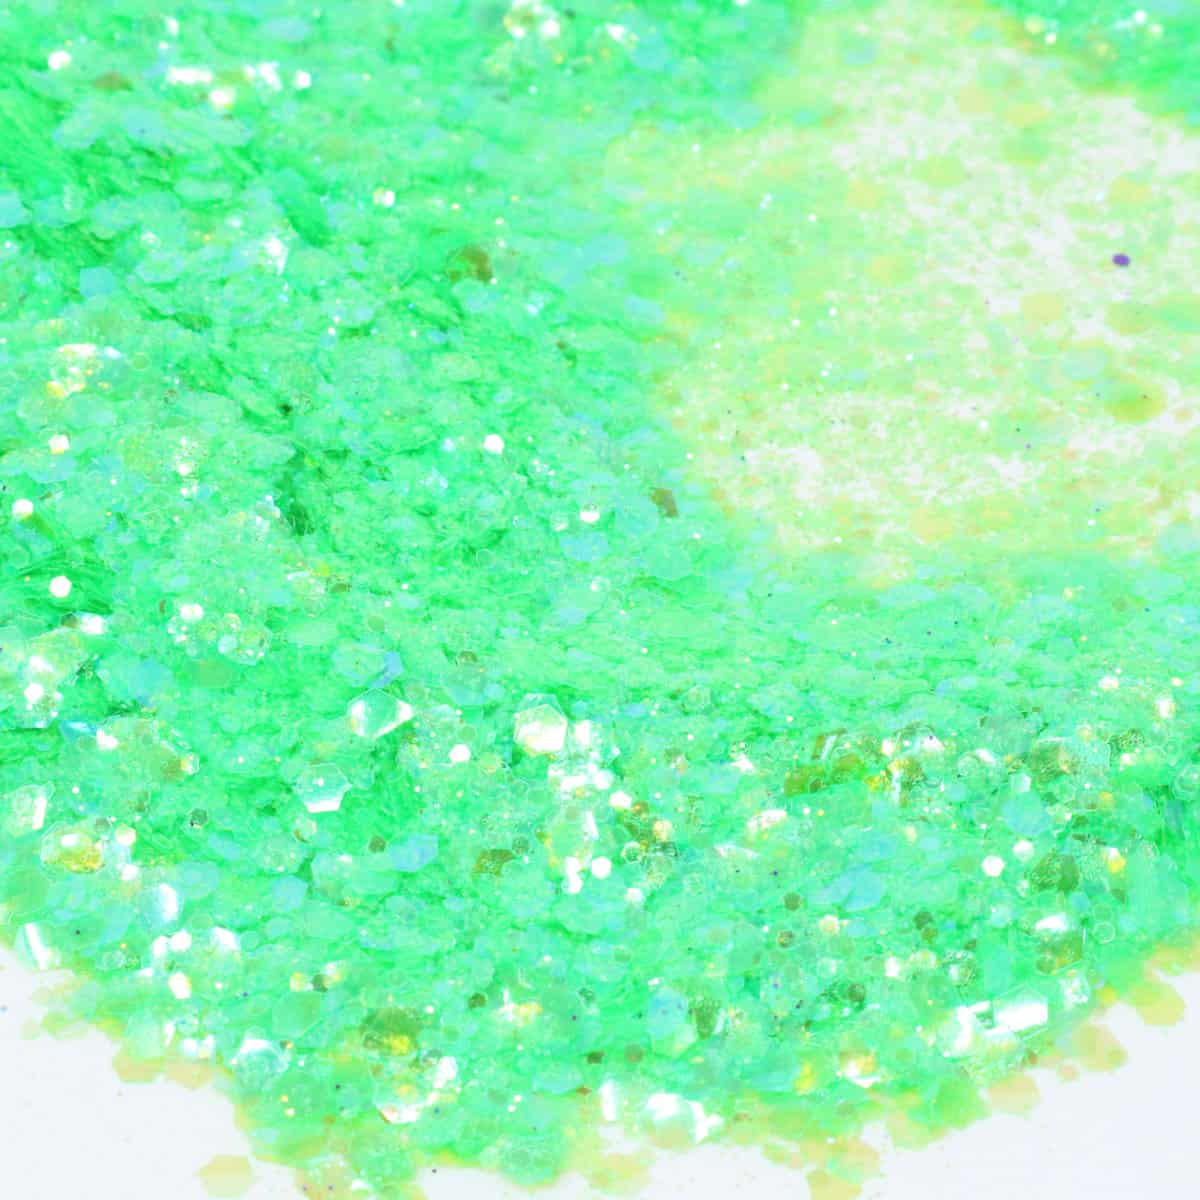 Flaky yellow and green glitter